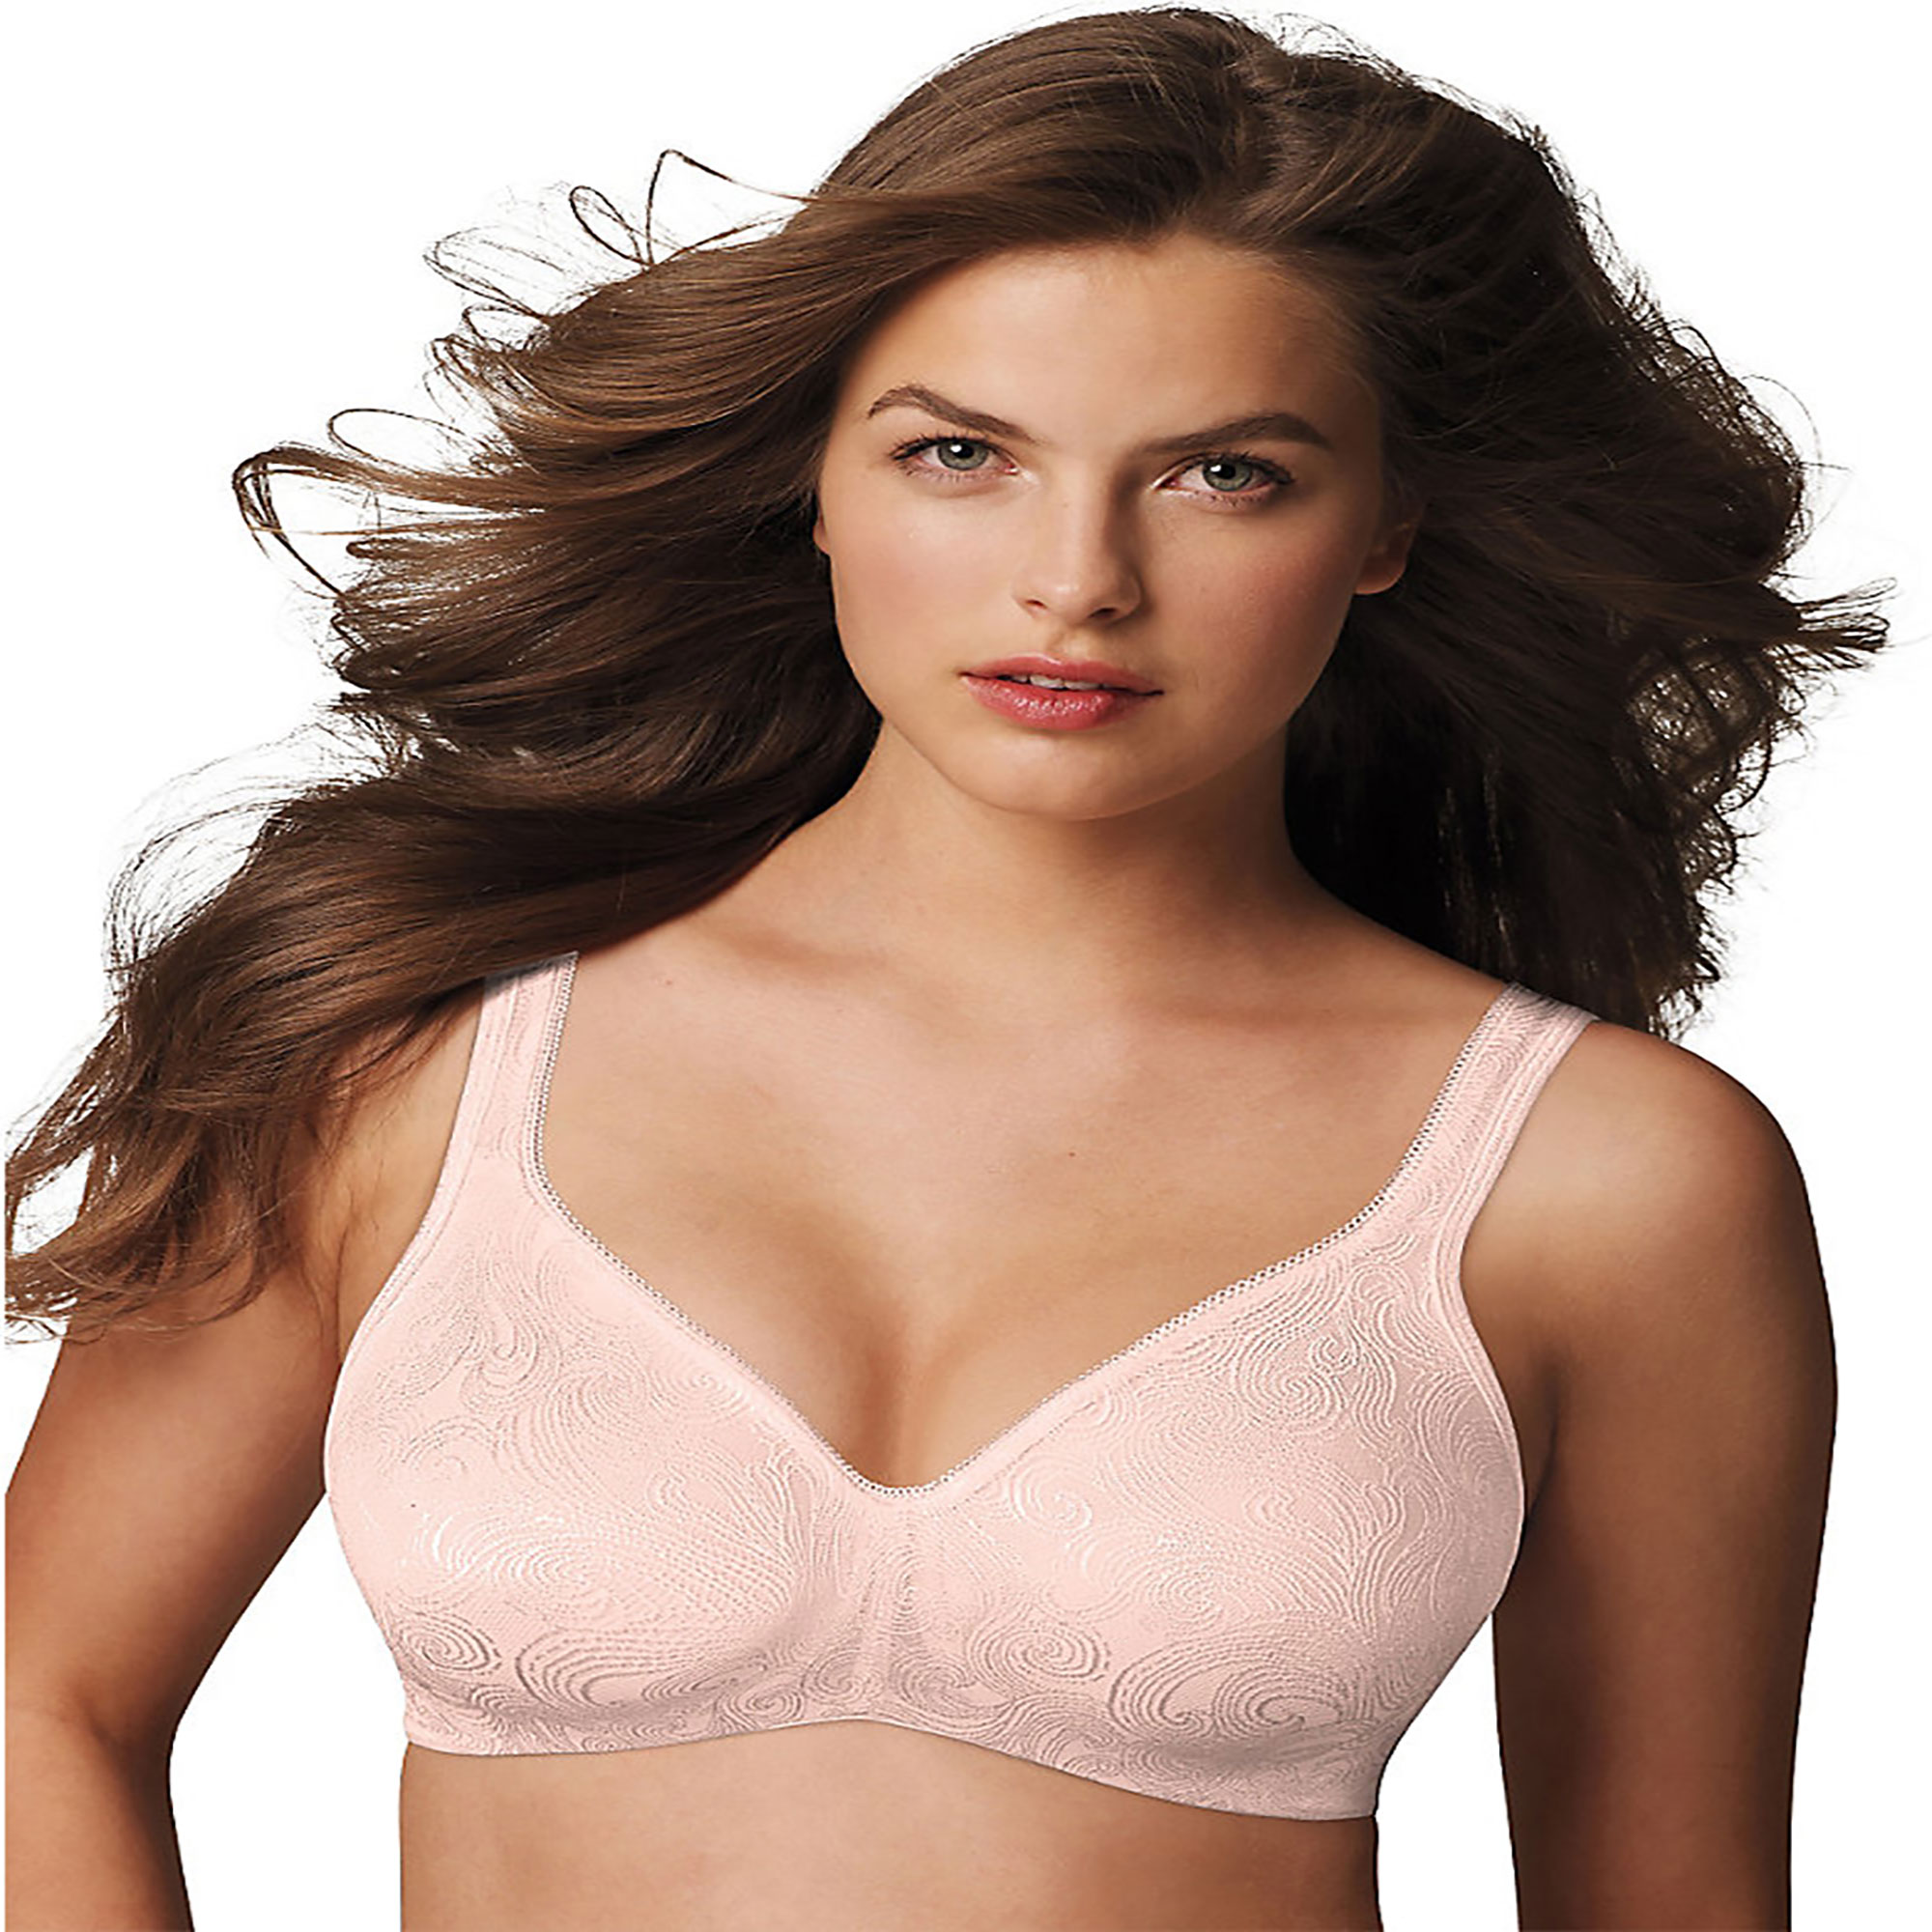 Playtex Secrets Beautiful Lift Classic Support Underwire Full Coverage Bra  4422 - JCPenney